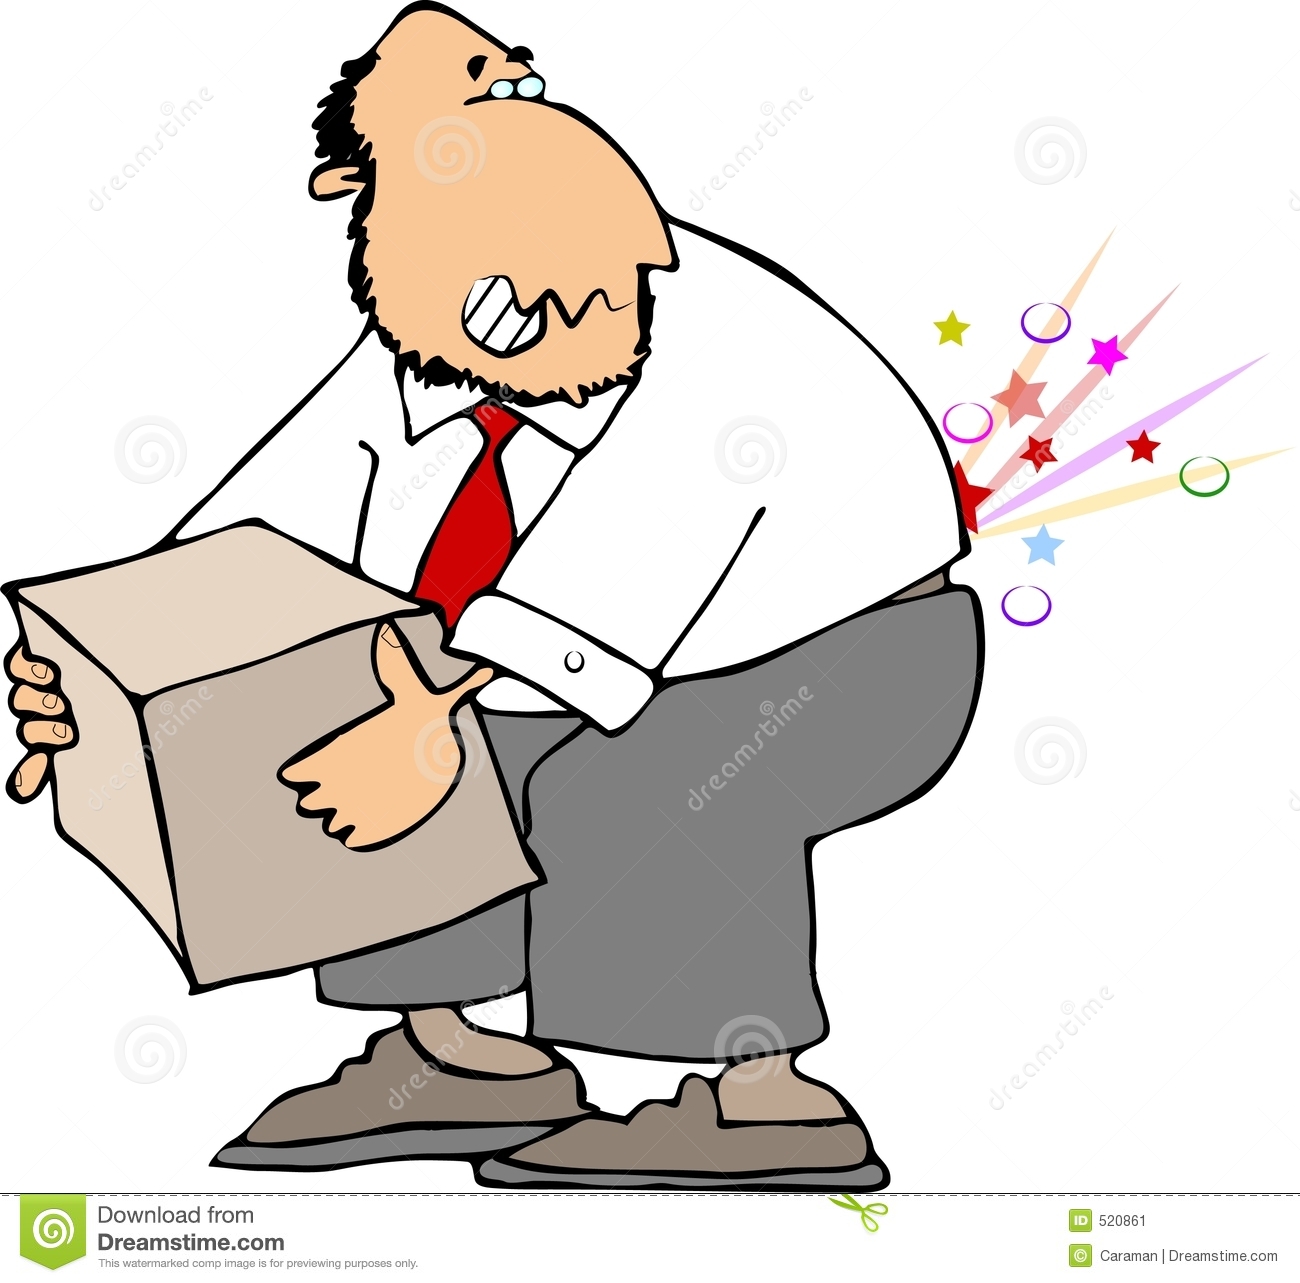 This Illustration Depicts A Man Picking Up A Box And Having Pain In